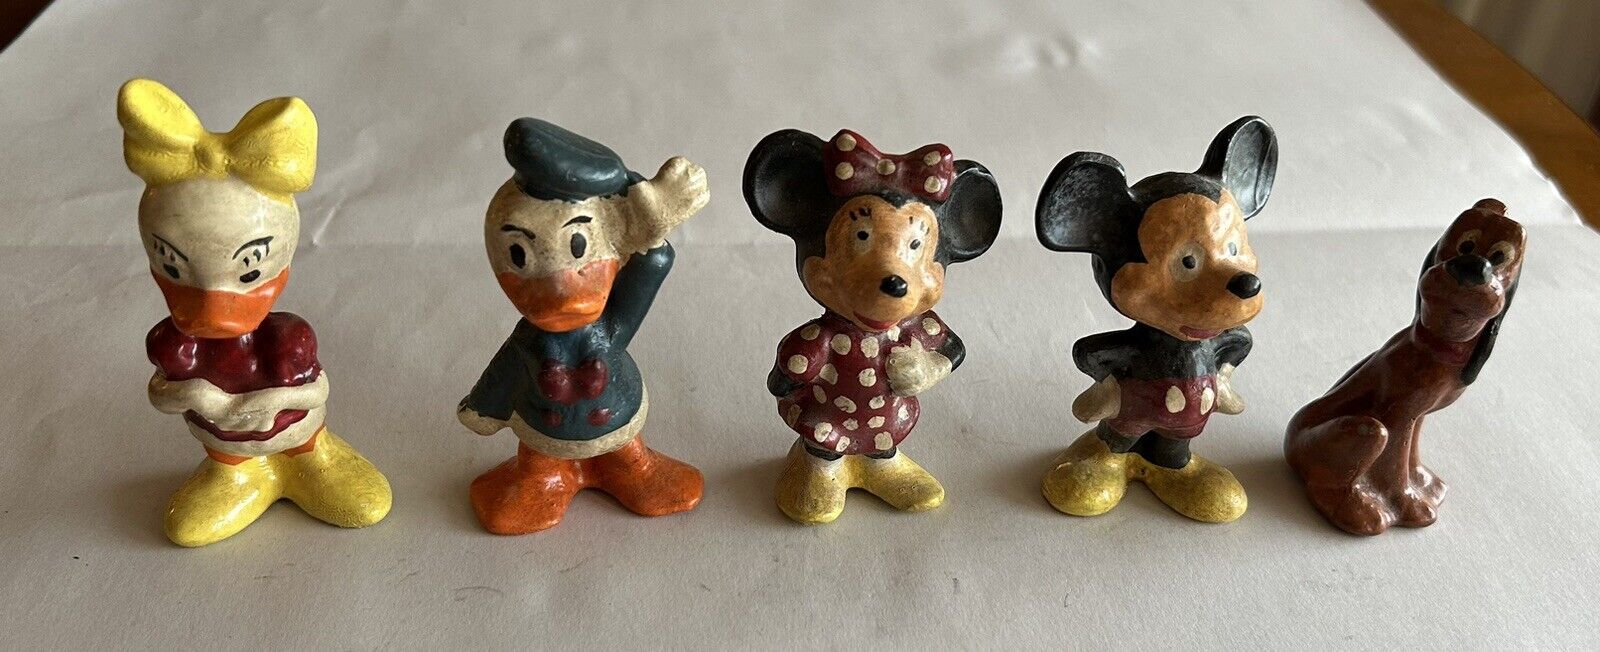 Rare- Lead, Vintage, Early 1940’s Mickey/Minnie Mouse /Donald/Daffy Duck/Pluto